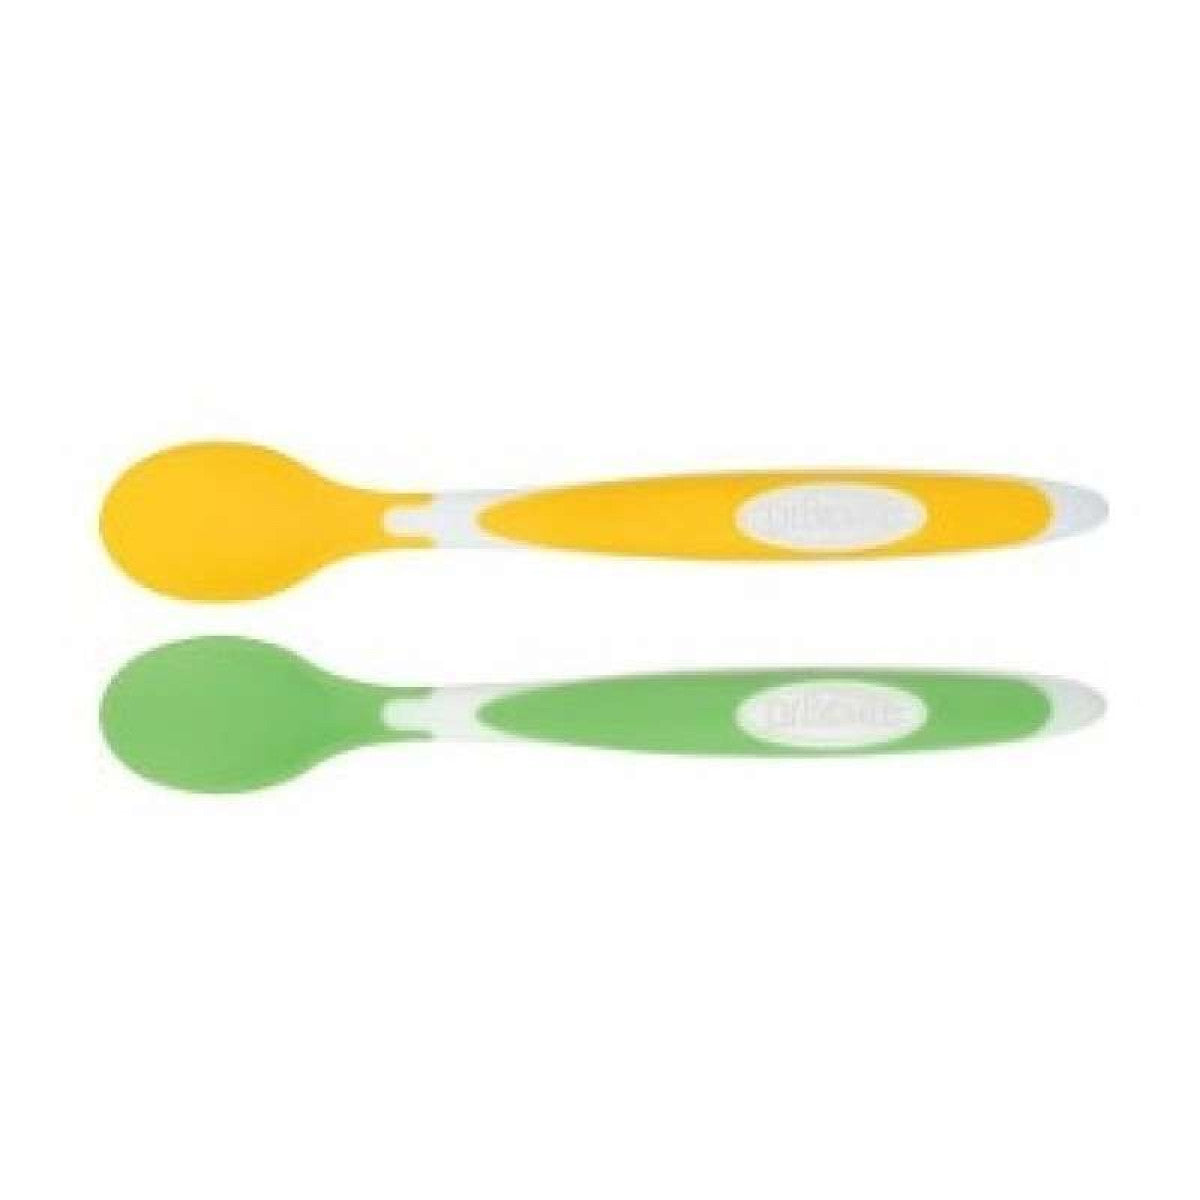 Dr. Brown's Soft Tip Spoons, 2-Pack - Green & Yellow